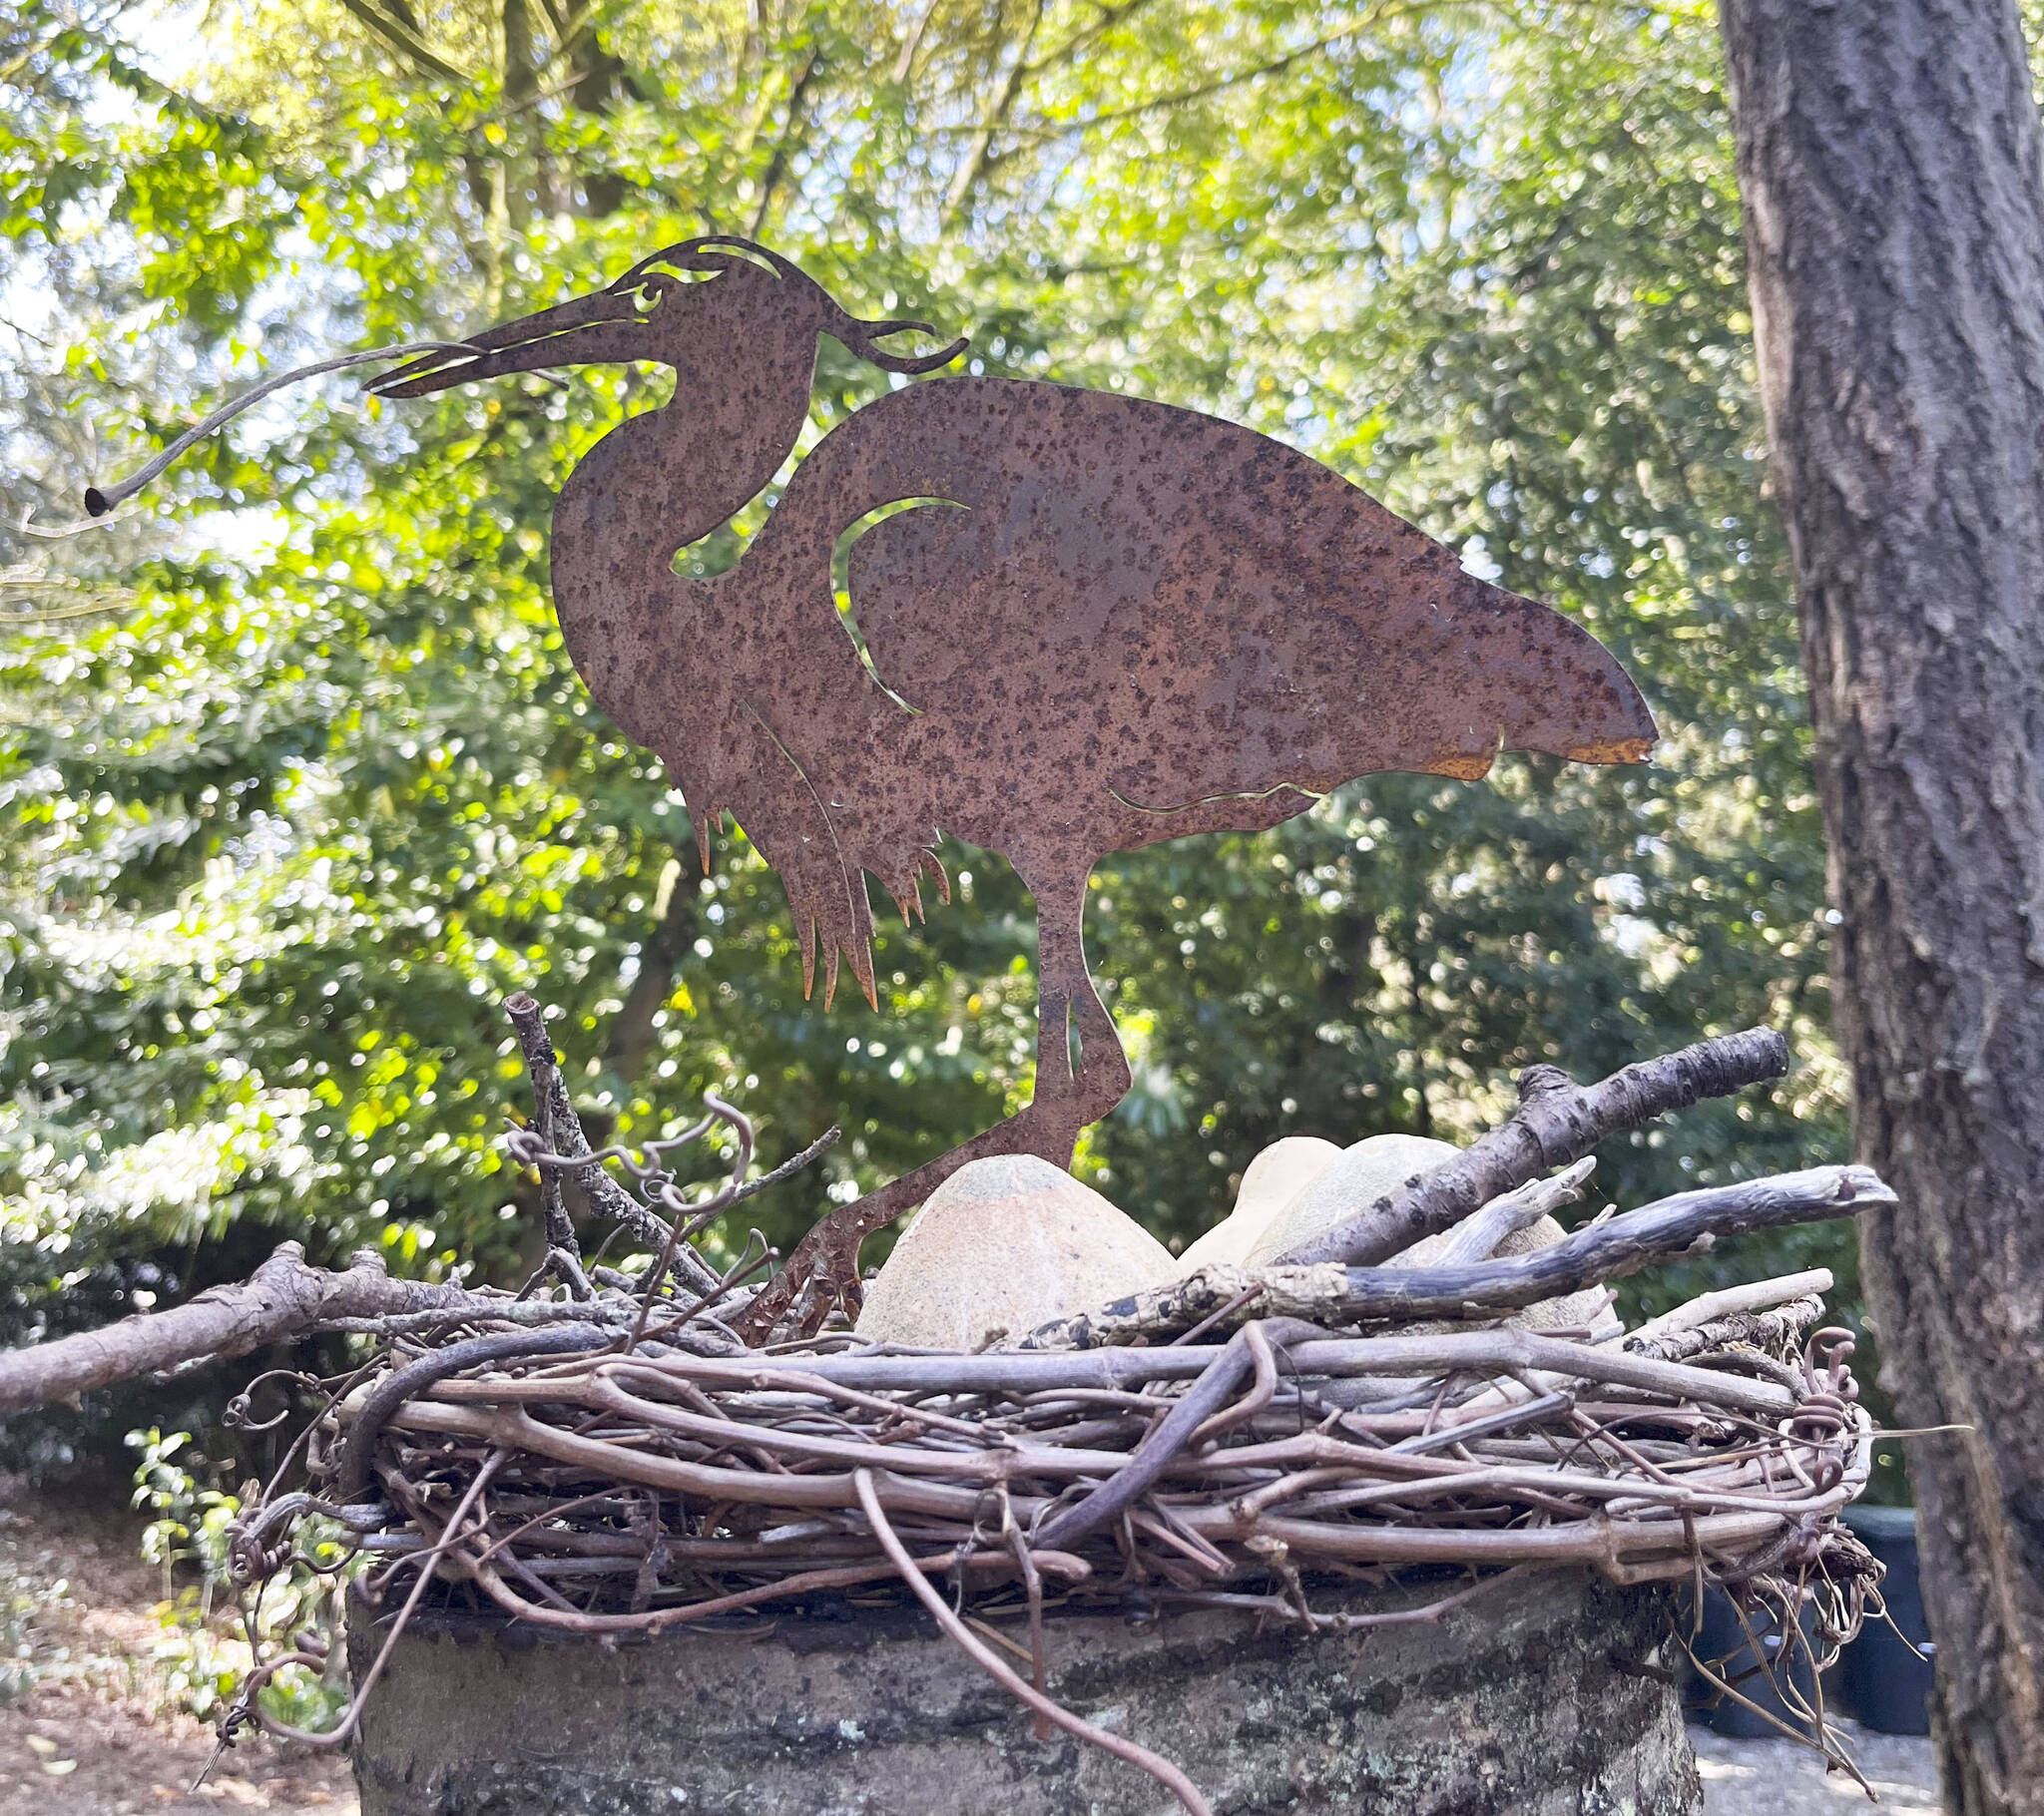 Molly Hetherwick/Kitsap News Group photos
The visage of a Great Blue Heron, complete with nest and eggs, decorates a mailbox on Lovell Avenue SW on Bainbridge Island.